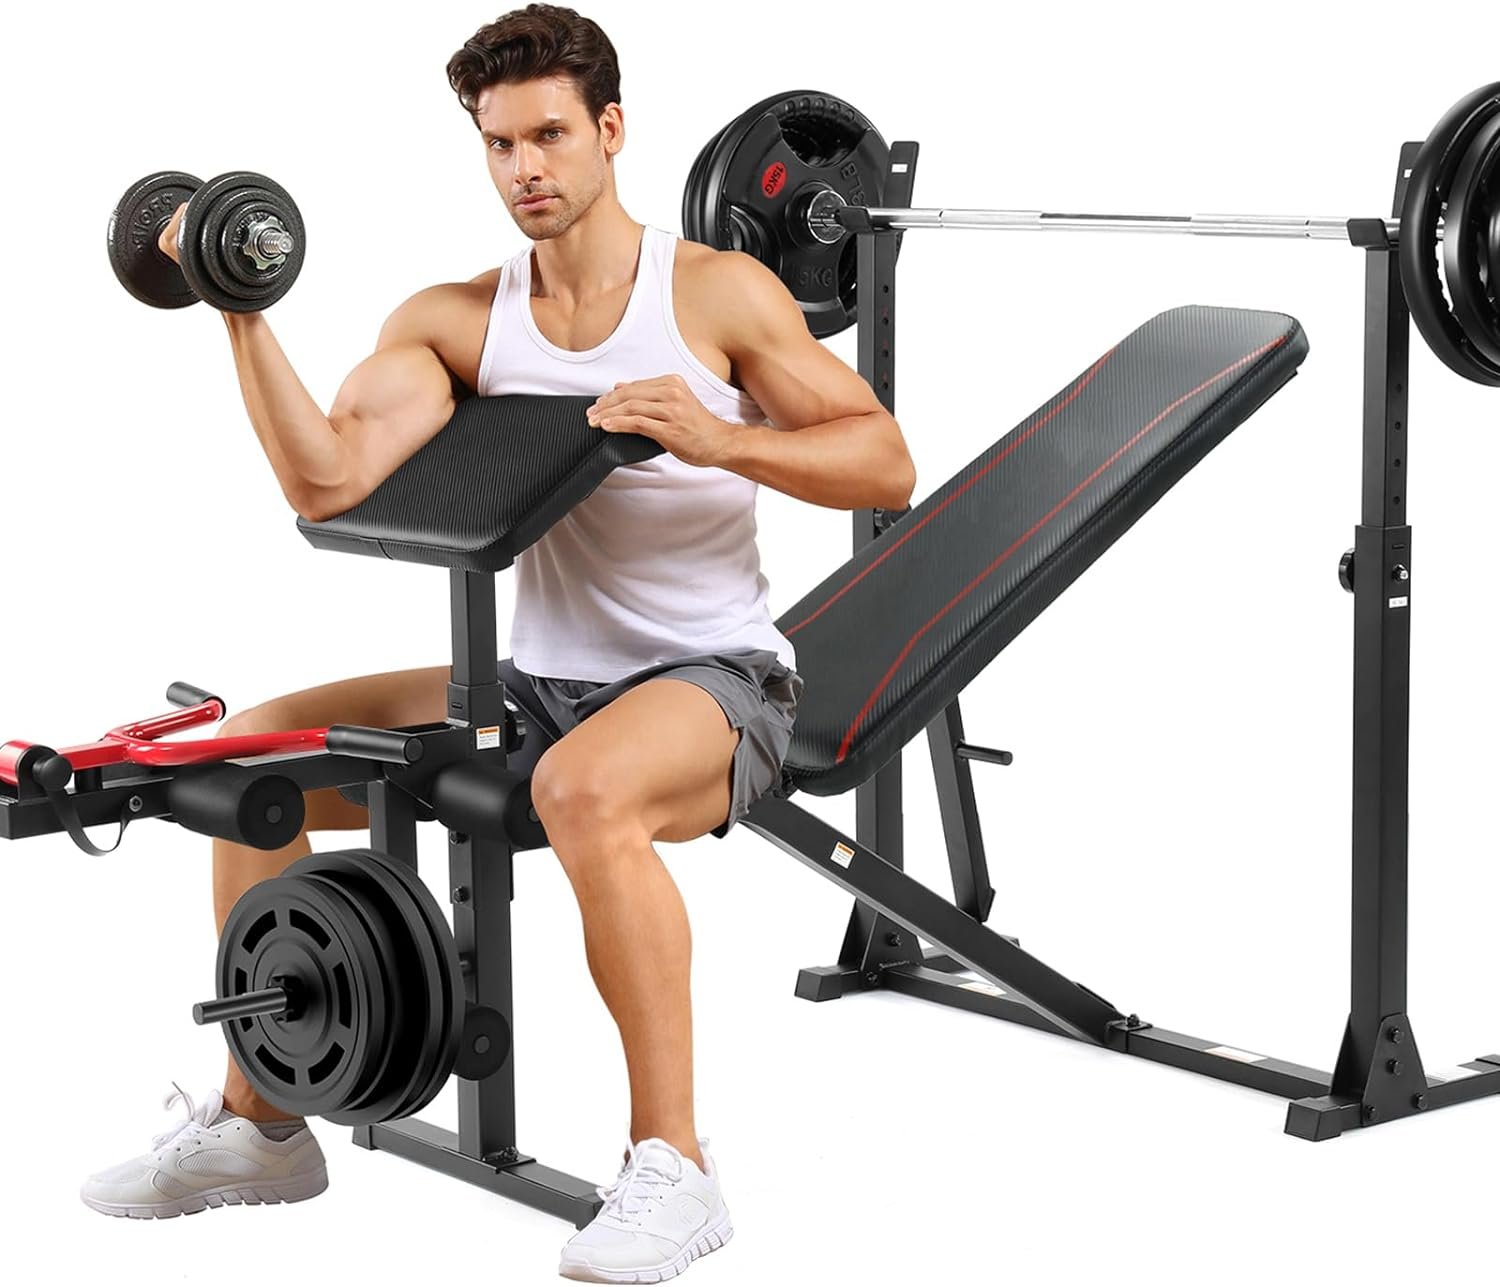 Aceshin Olympic Weight Bench Review